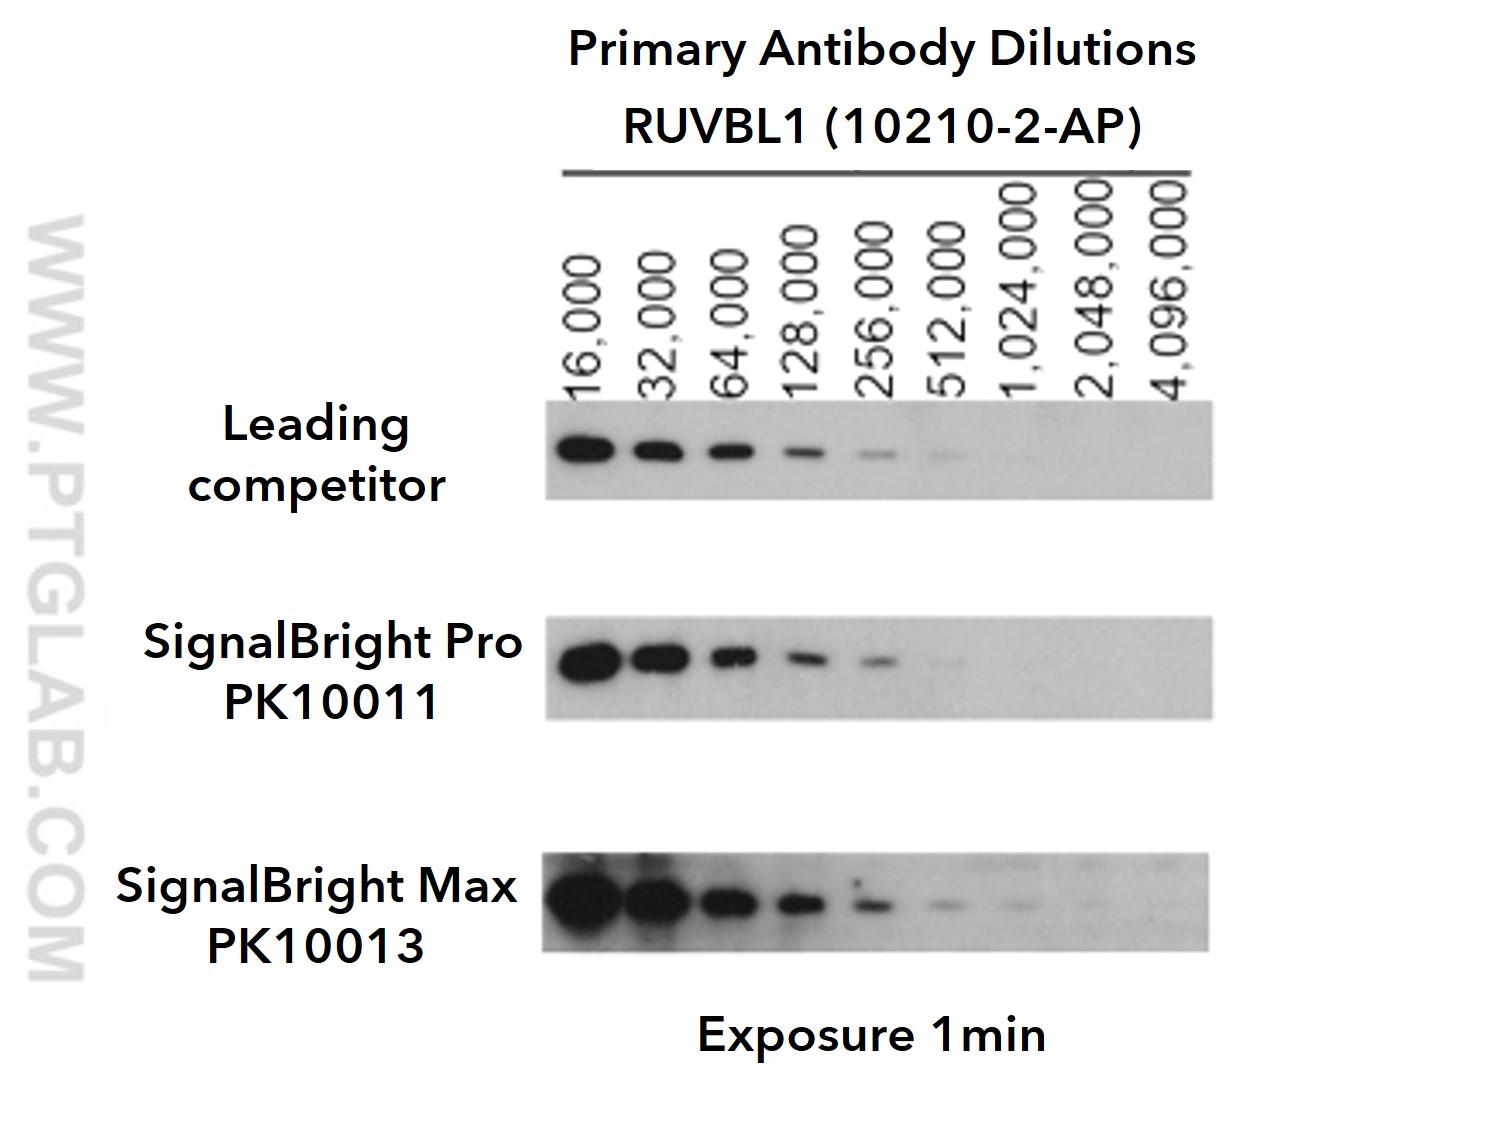 Serial dilutions of RUVBL primary antibody (10210-2-AP)
<br>Primary: Proteintech RUVBL1 (10210-2-AP) at various dilutions (see image)
<br>Secondary: Proteintech HRP-conjugated Affinipure Goat Anti-Rabbit IgG (SA00001-2); 1:6,000
<br>Exposure time: 1 min 
<br>Chemiluminescent substrates from leading competitor, SignalBright Pro (PK10011), SignalBright Max (PK10013)